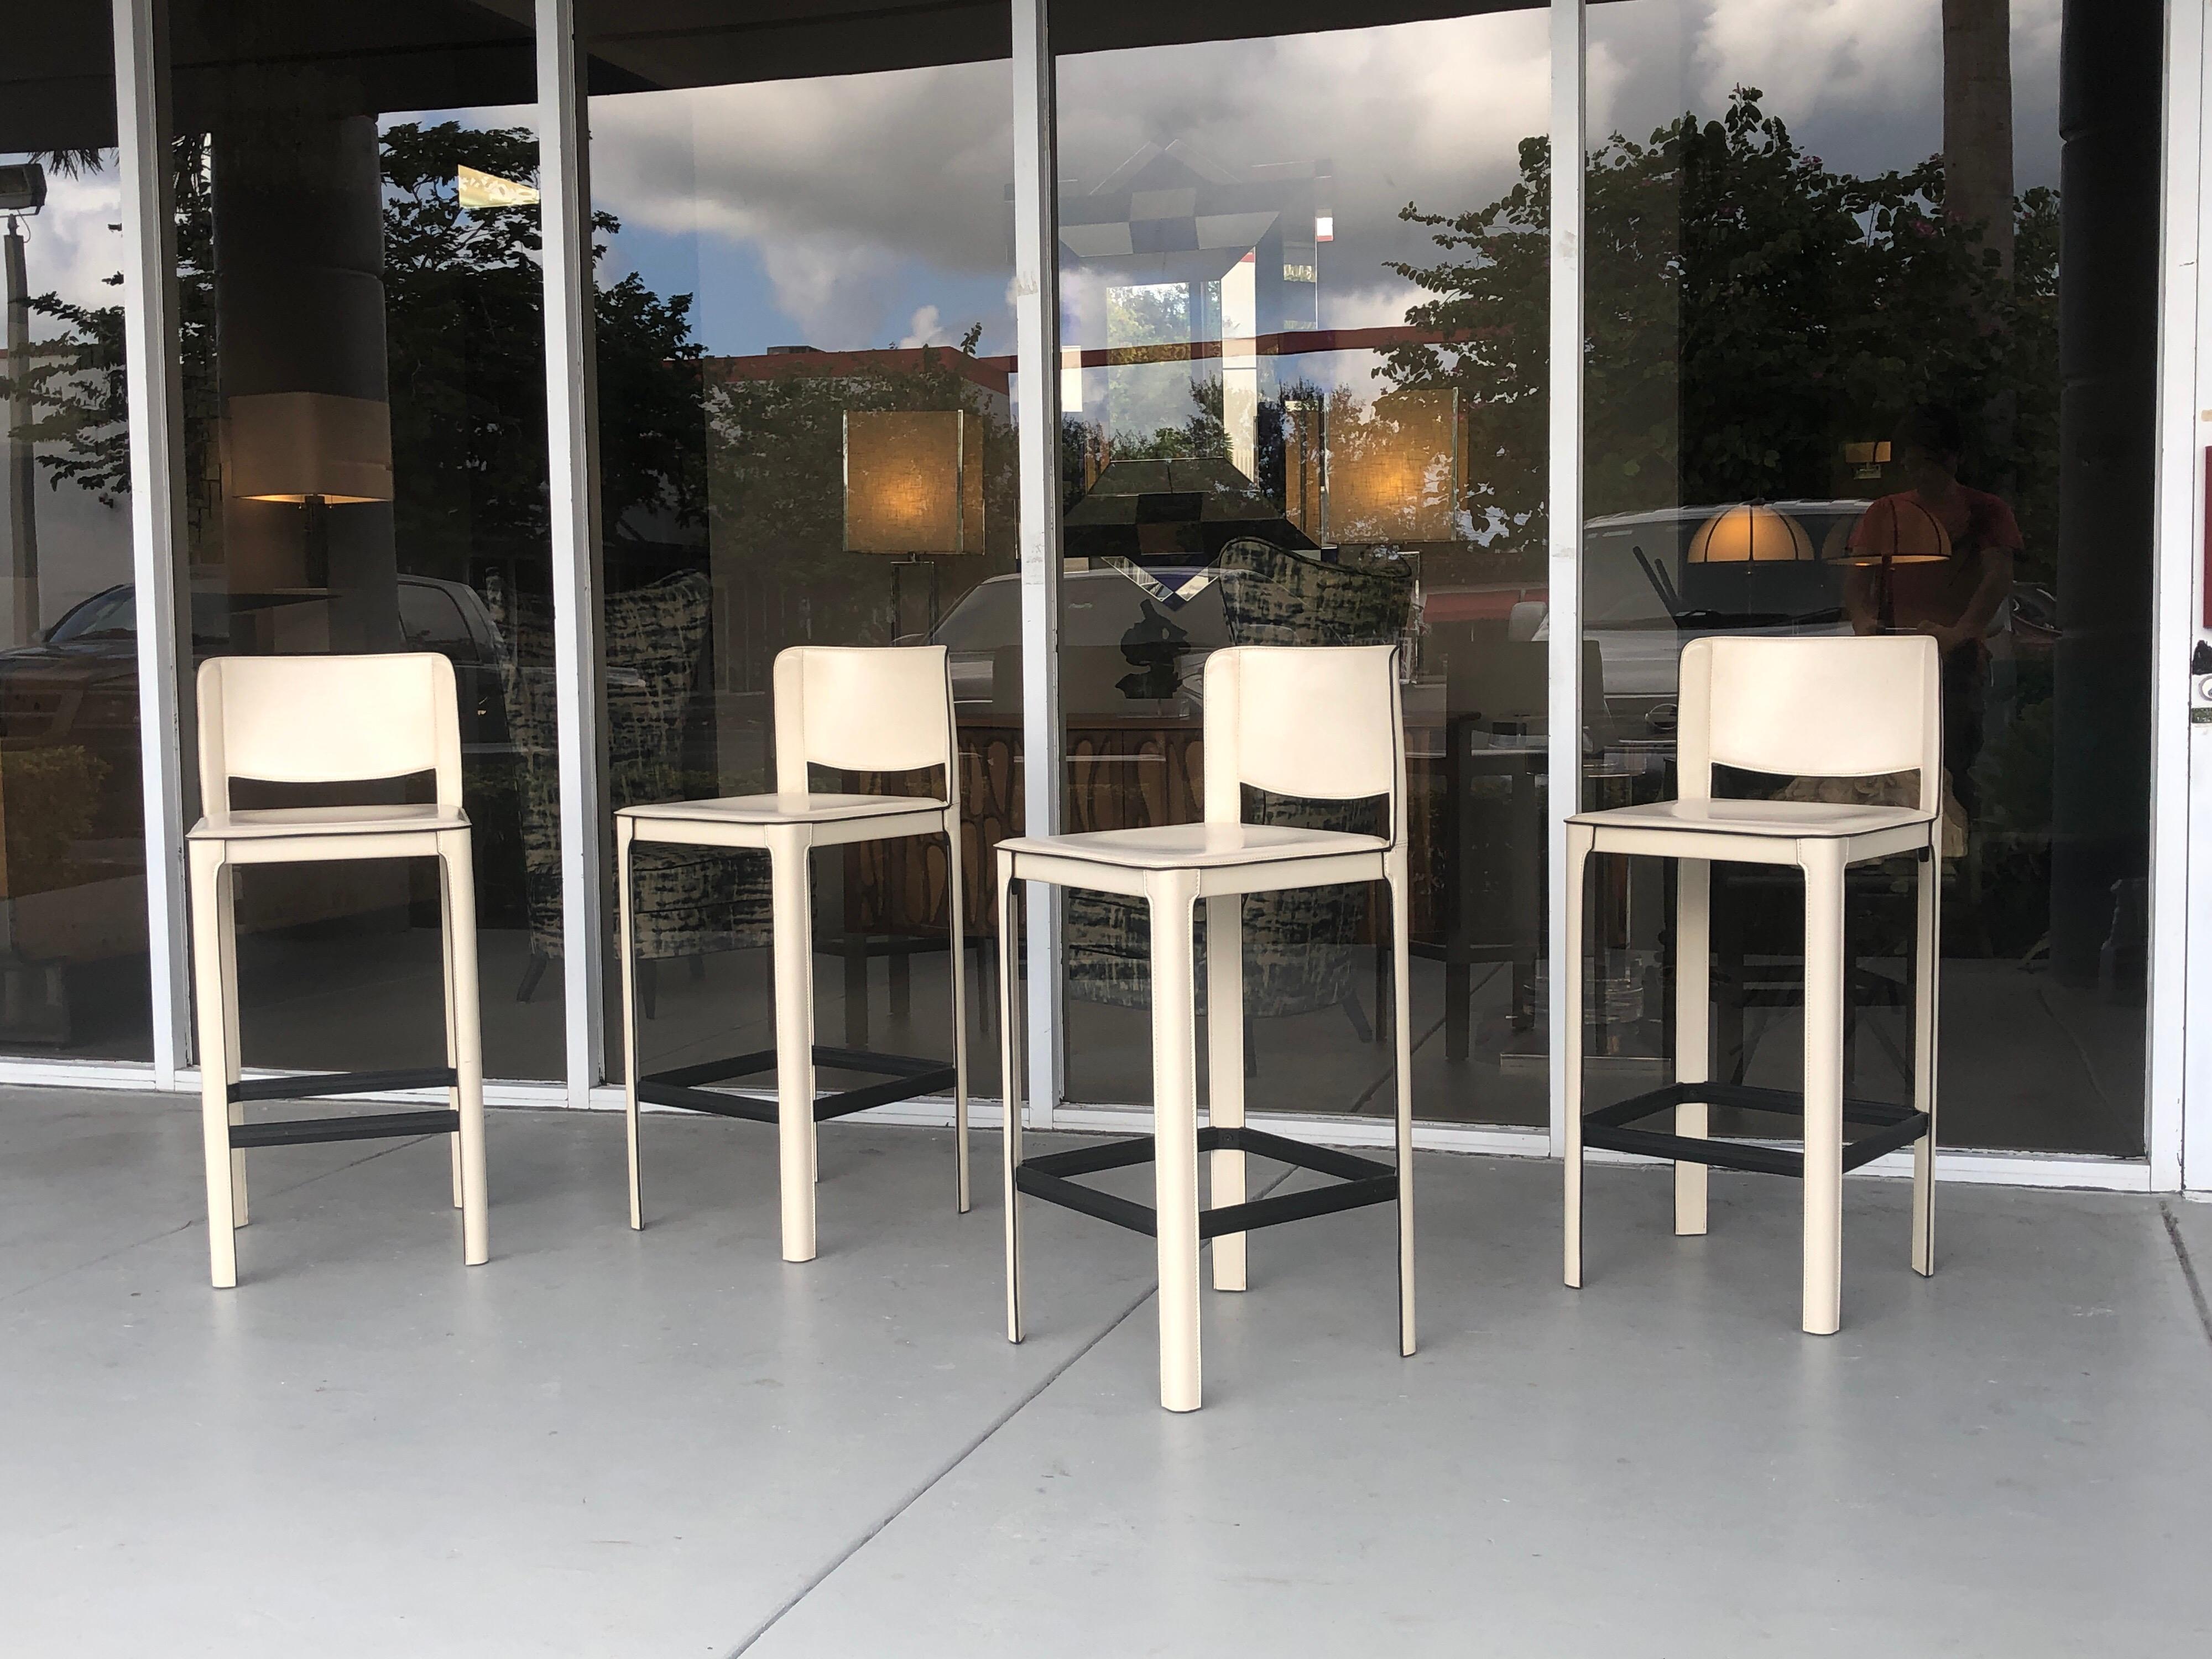 A set of 4 leather bar stools by Matteo Grassi. Modern Minimalist design. In very good condition.